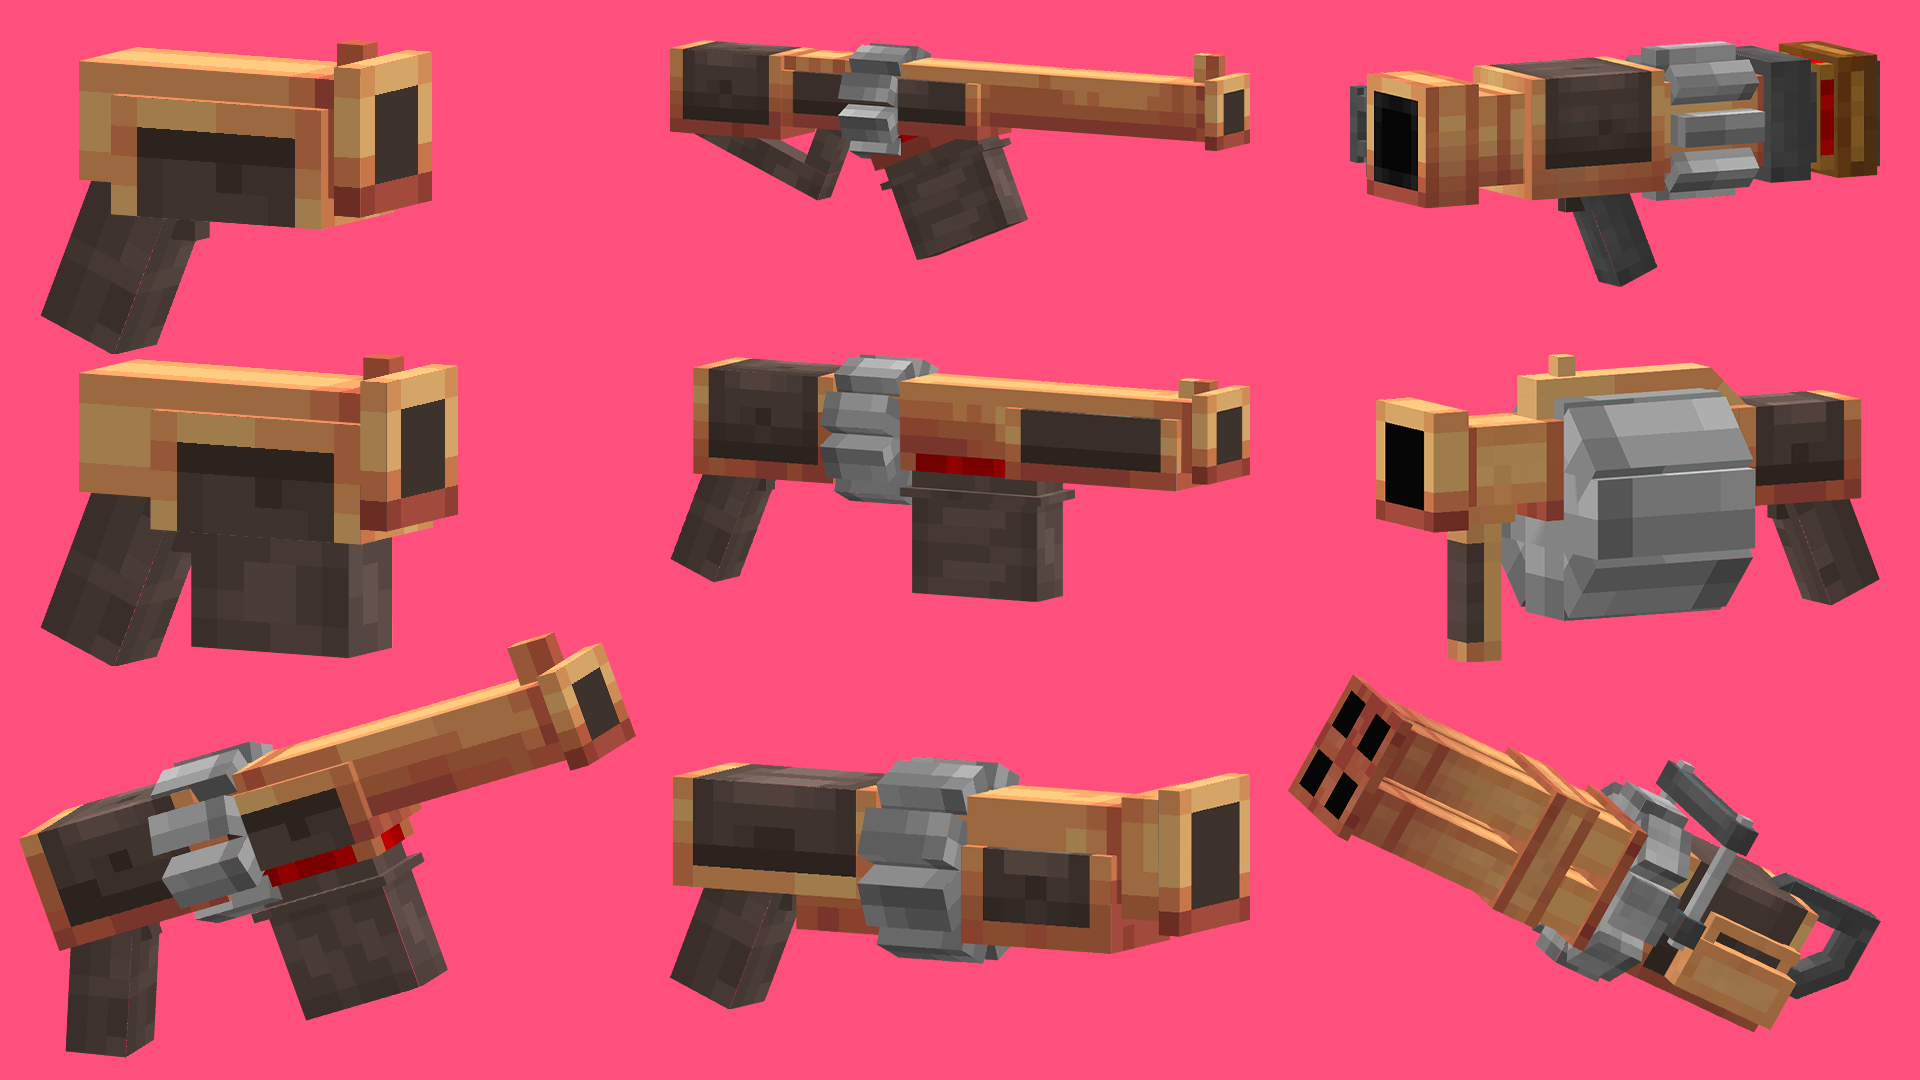 Guns,Drugs,Money GTA RP type Texture Pack by Zannakos for 1.14, 1.16+  Minecraft Texture Pack